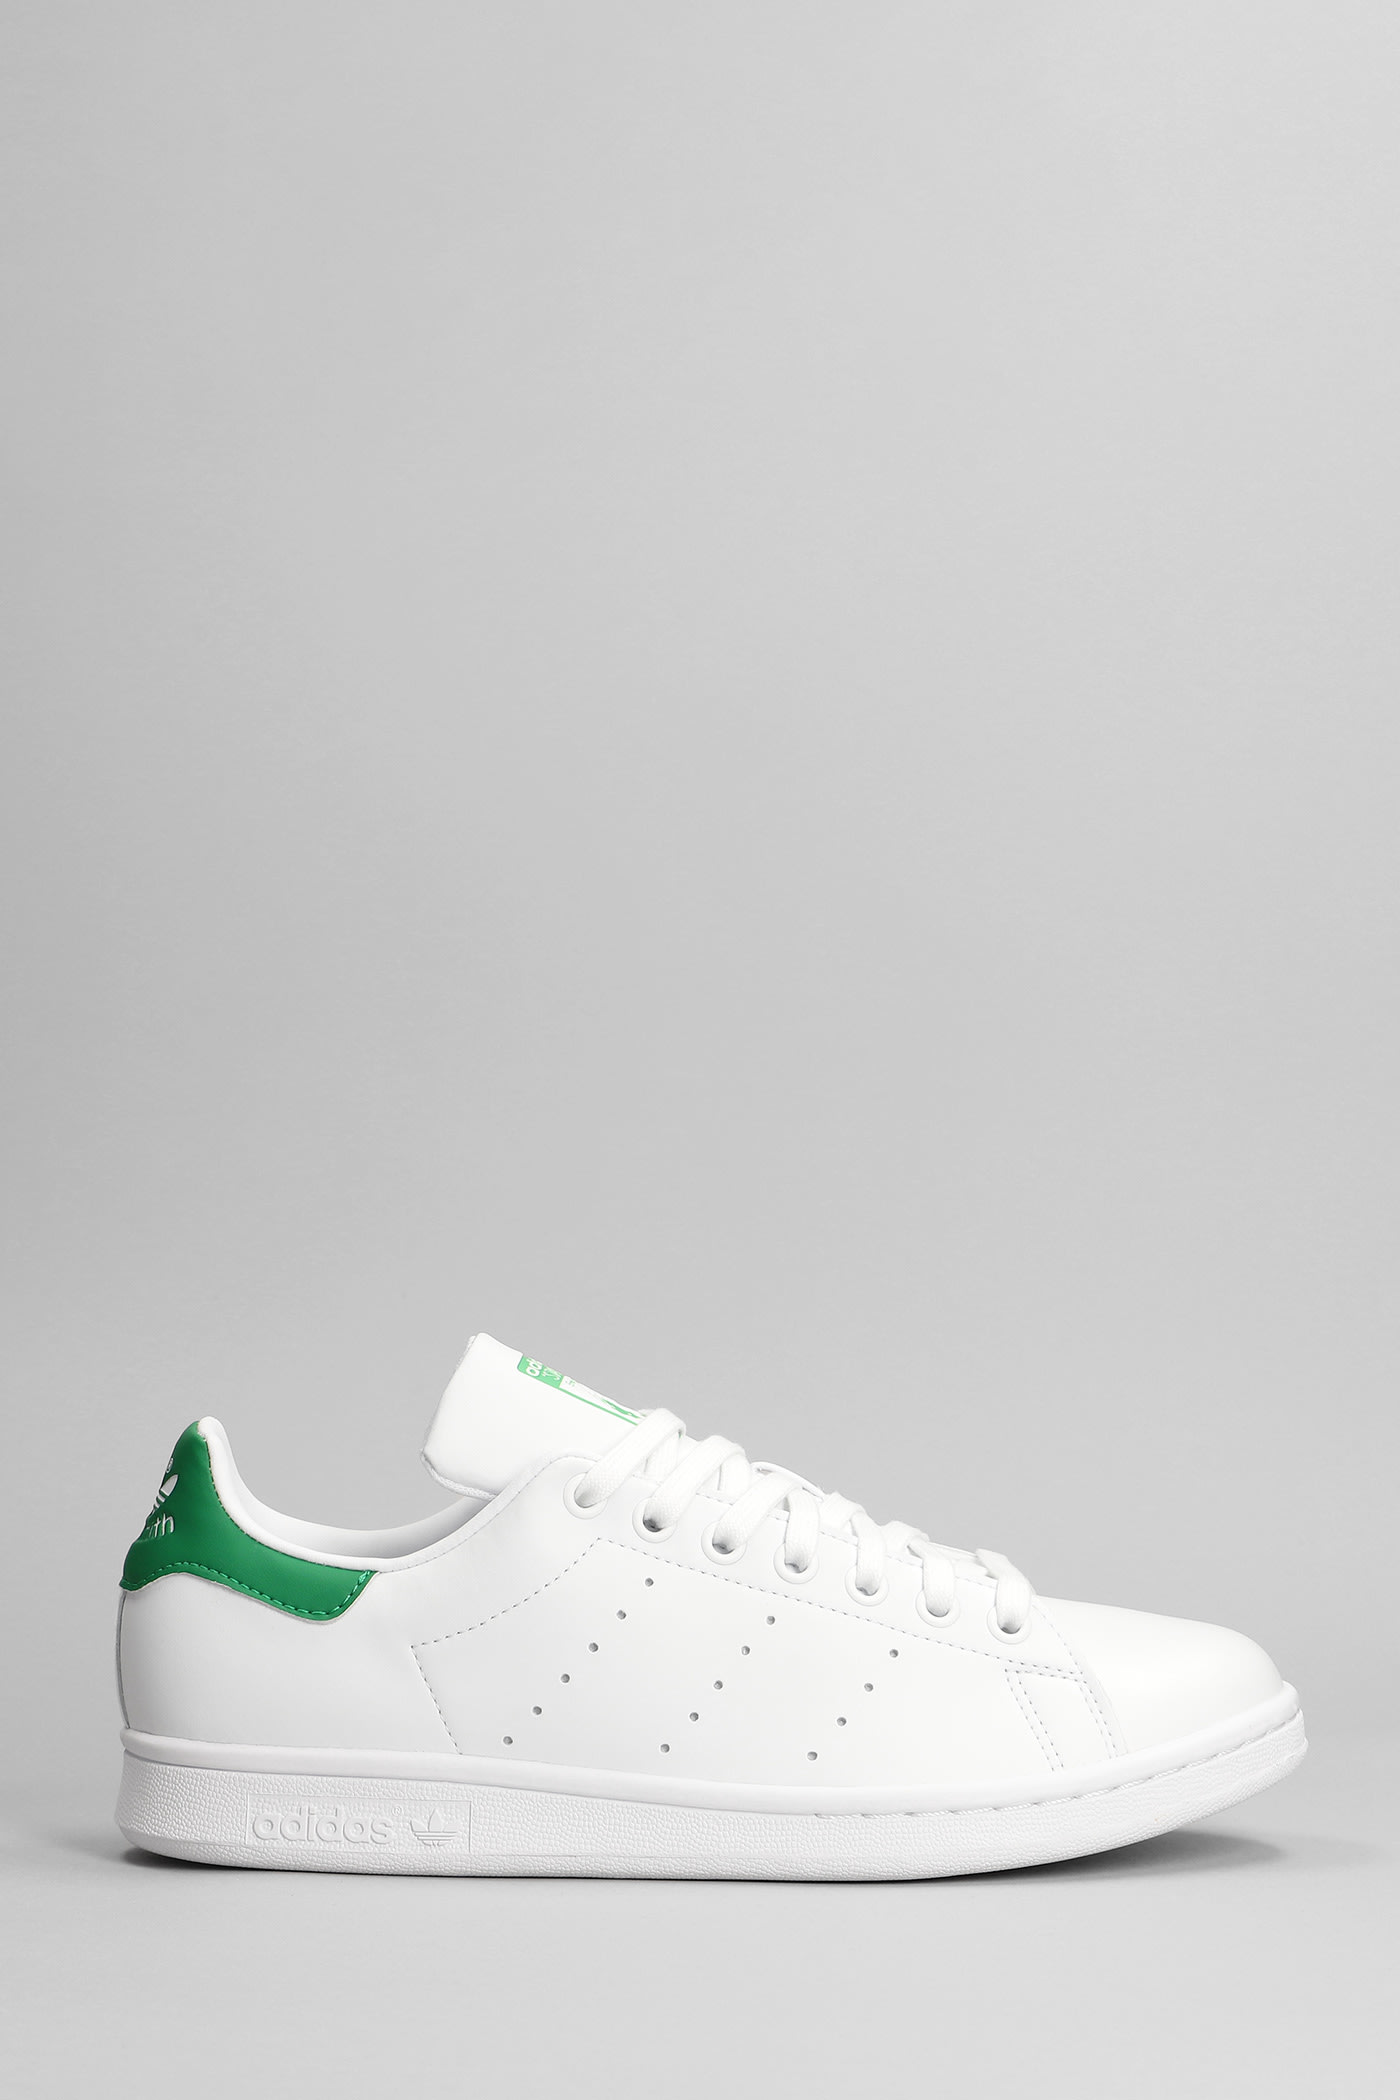 Shop Adidas Originals Stan Smith Sneakers In White Leather In White And Green